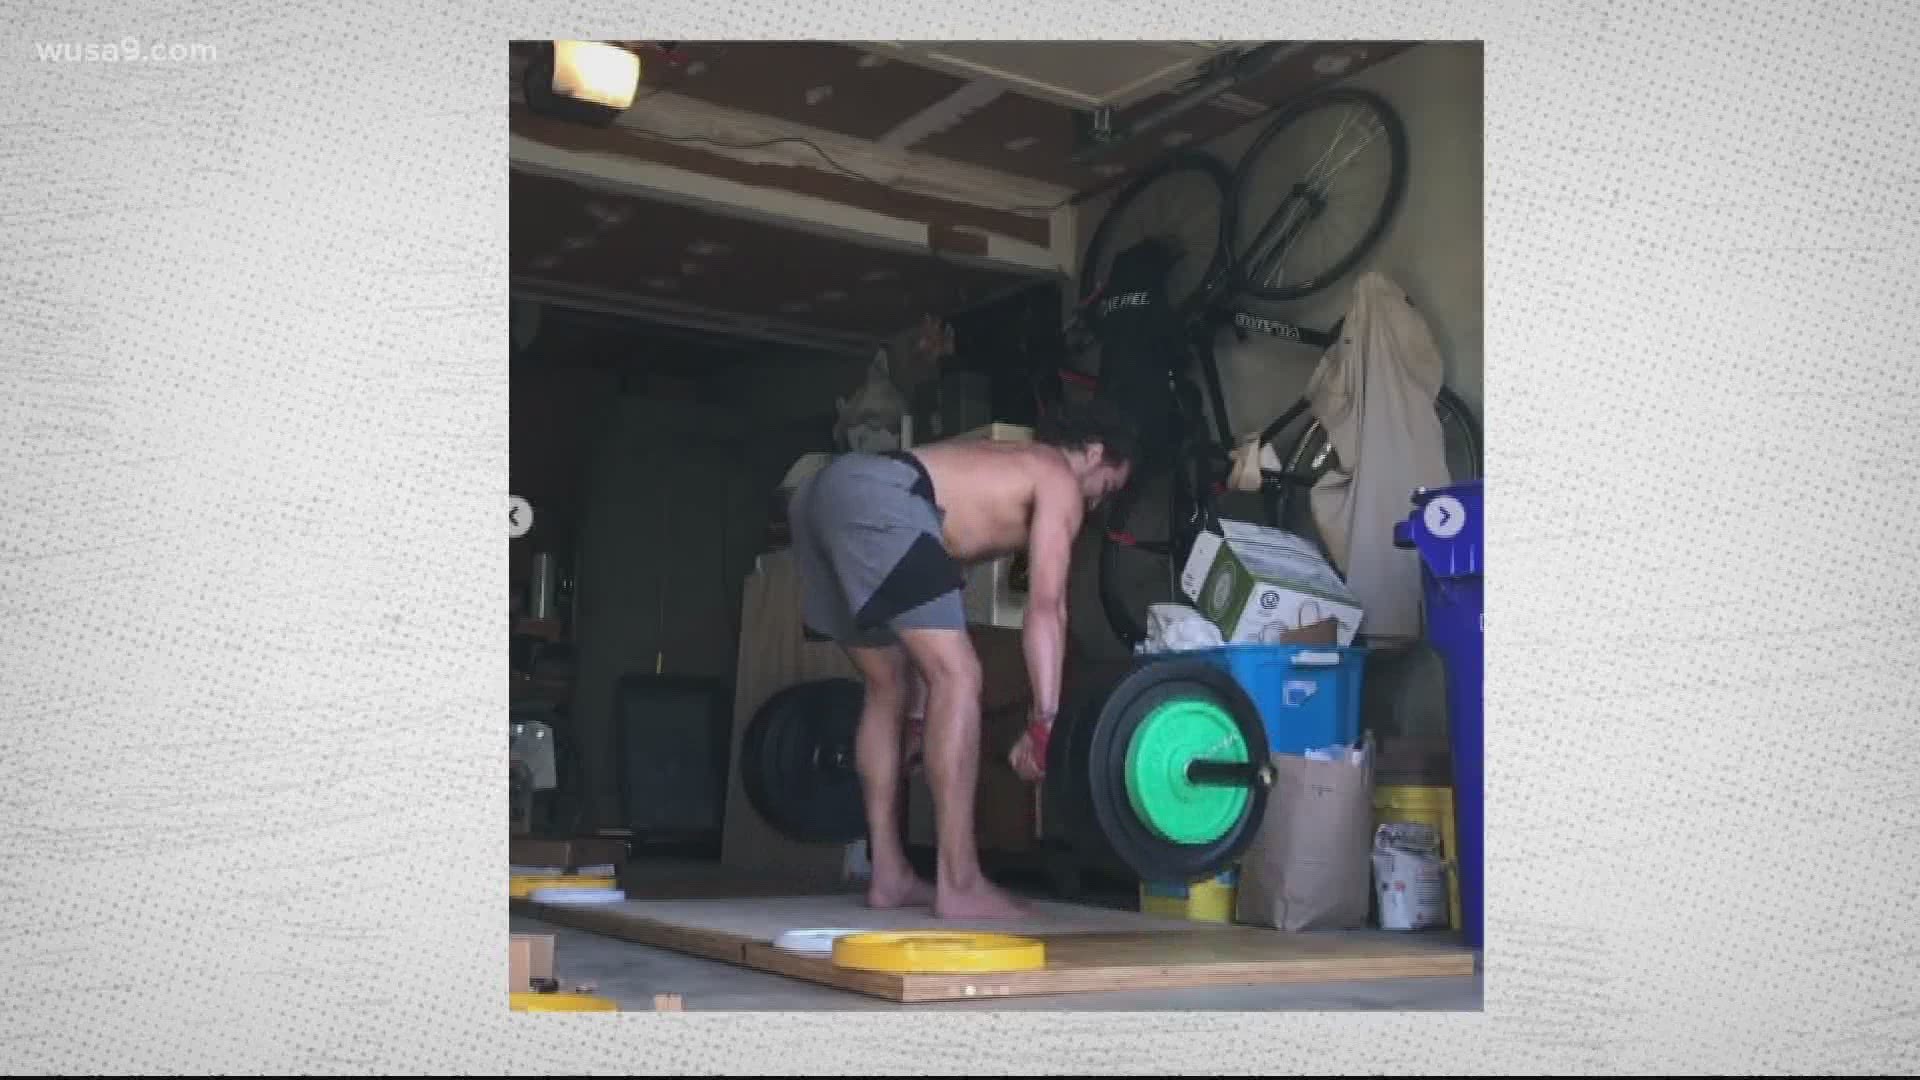 With many gyms still closed, people are buying equipment to do their workouts at home.